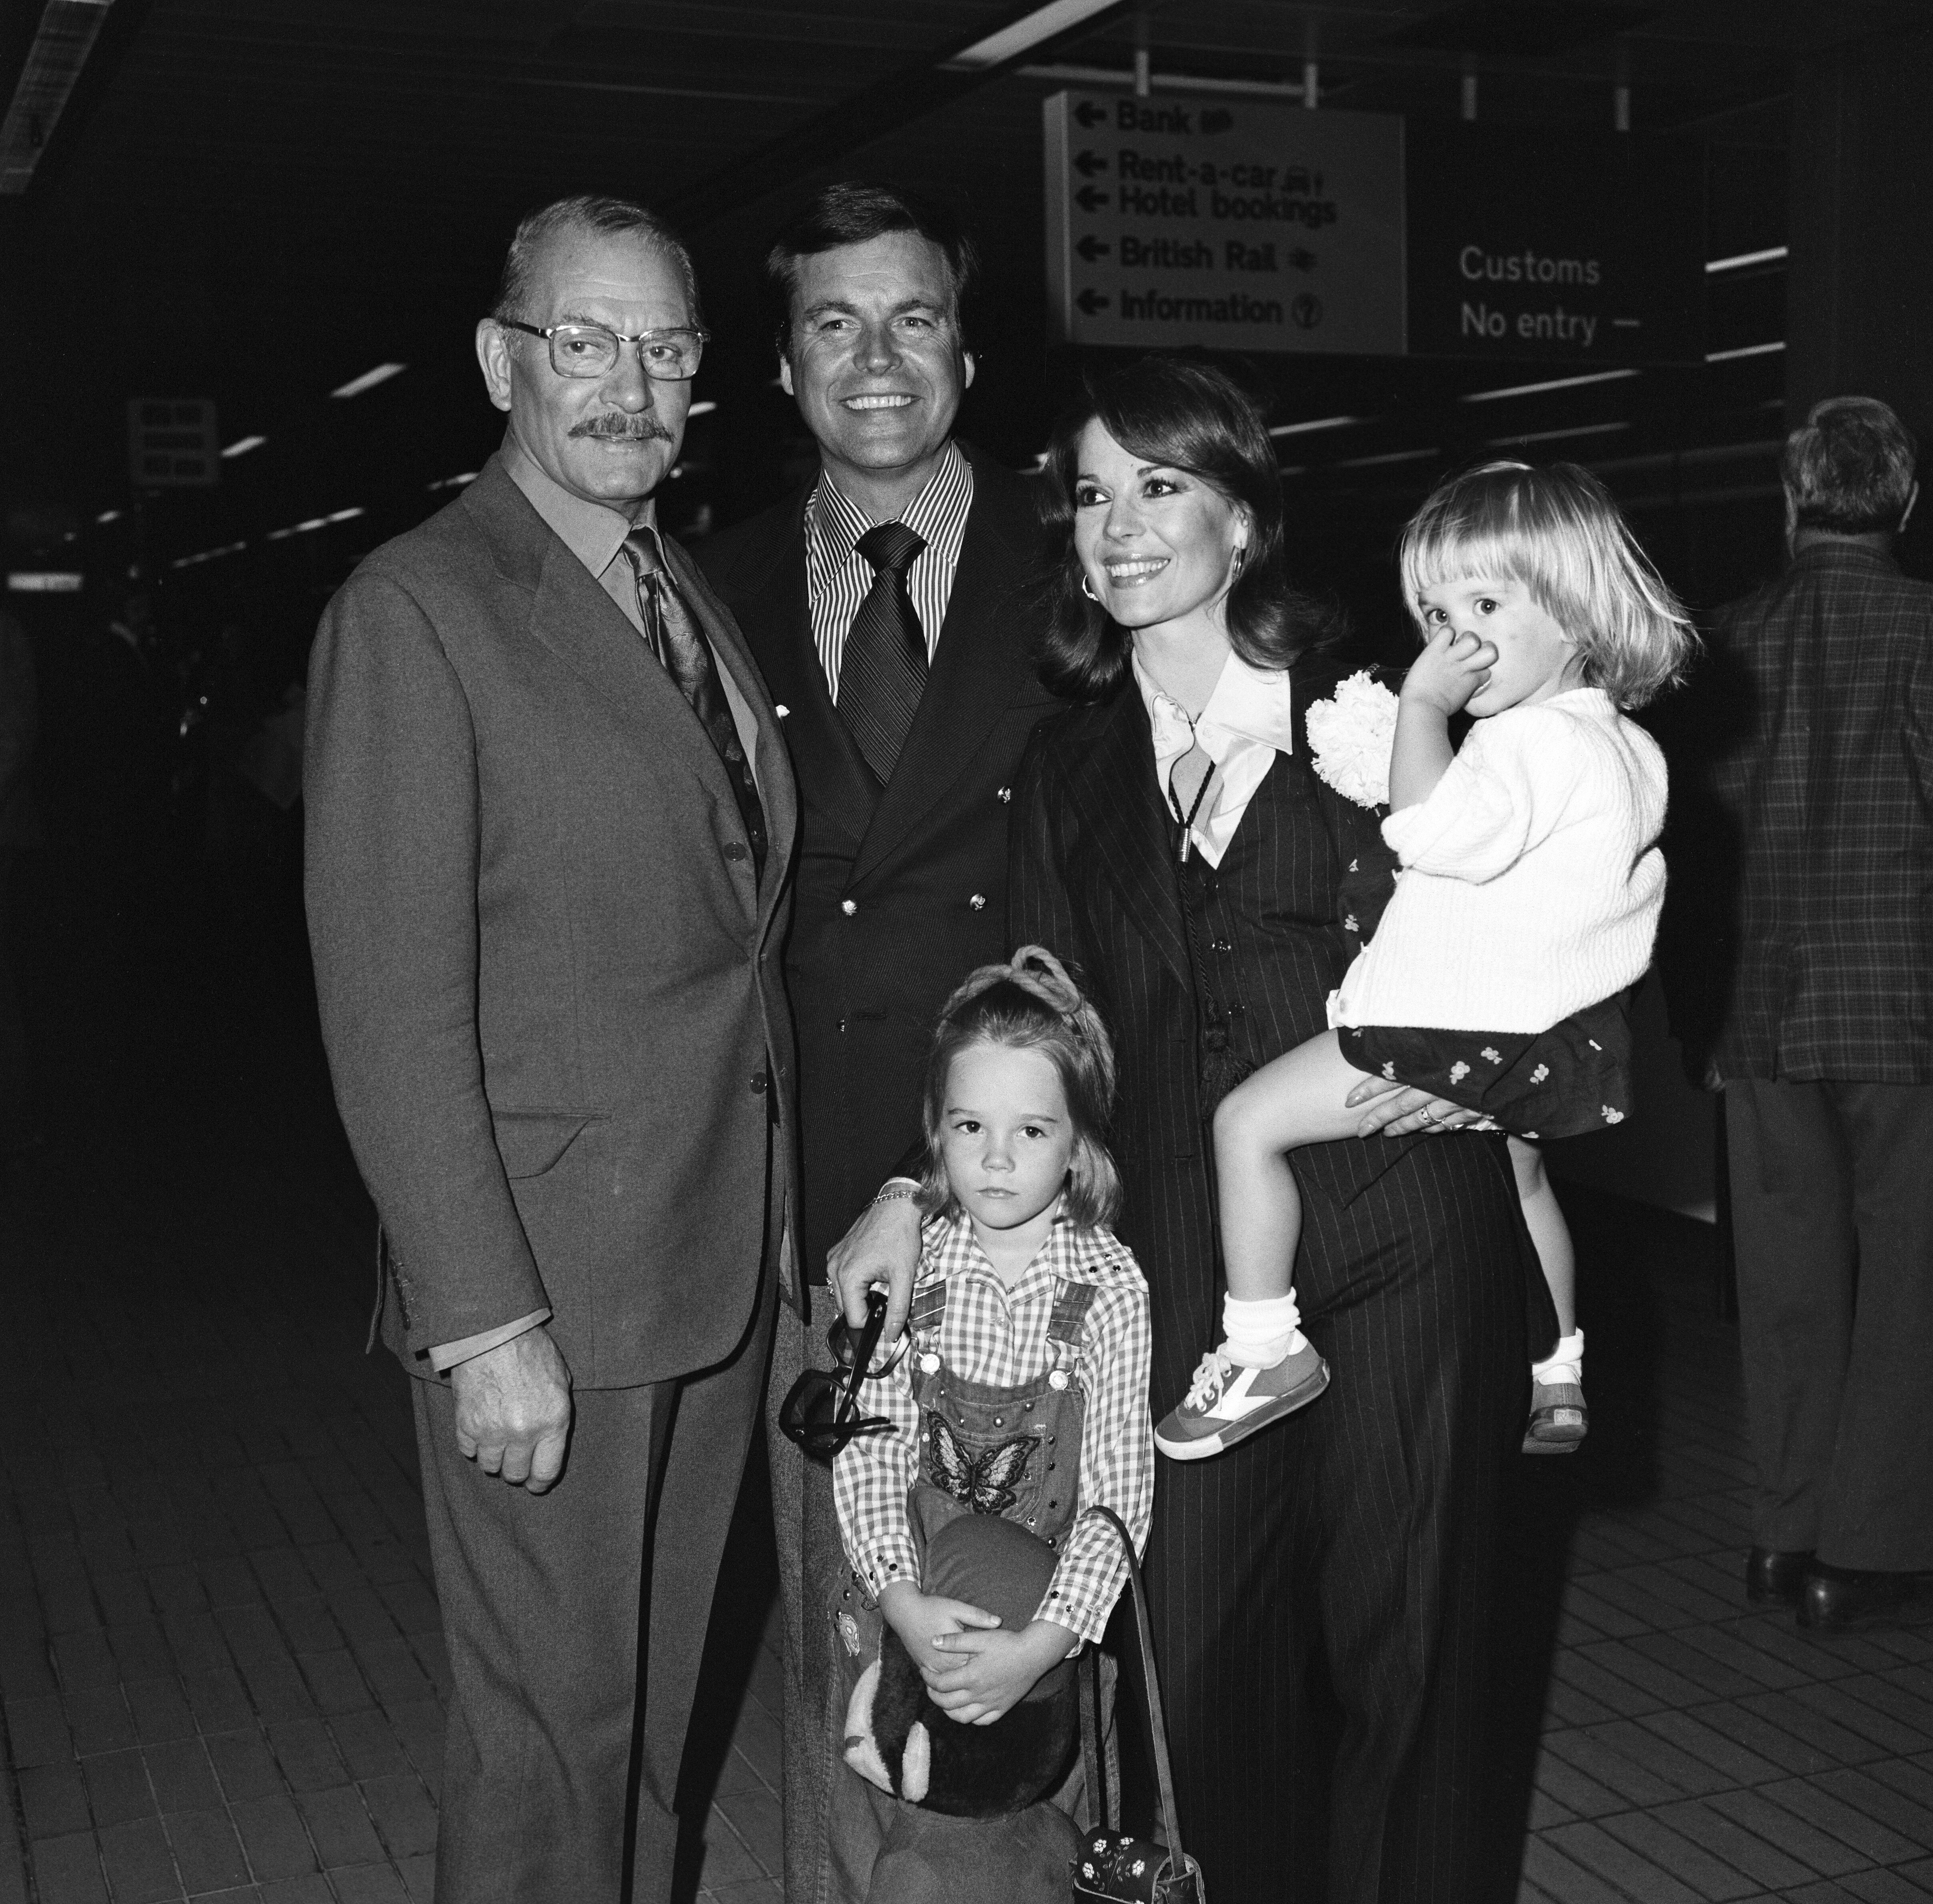 Lord Olivier, Robert Wagner, Natalie Wood, Courtney Wagner and Natasha Gregson Wagner, in London, UK May 19, 1976 | Source: Getty Images